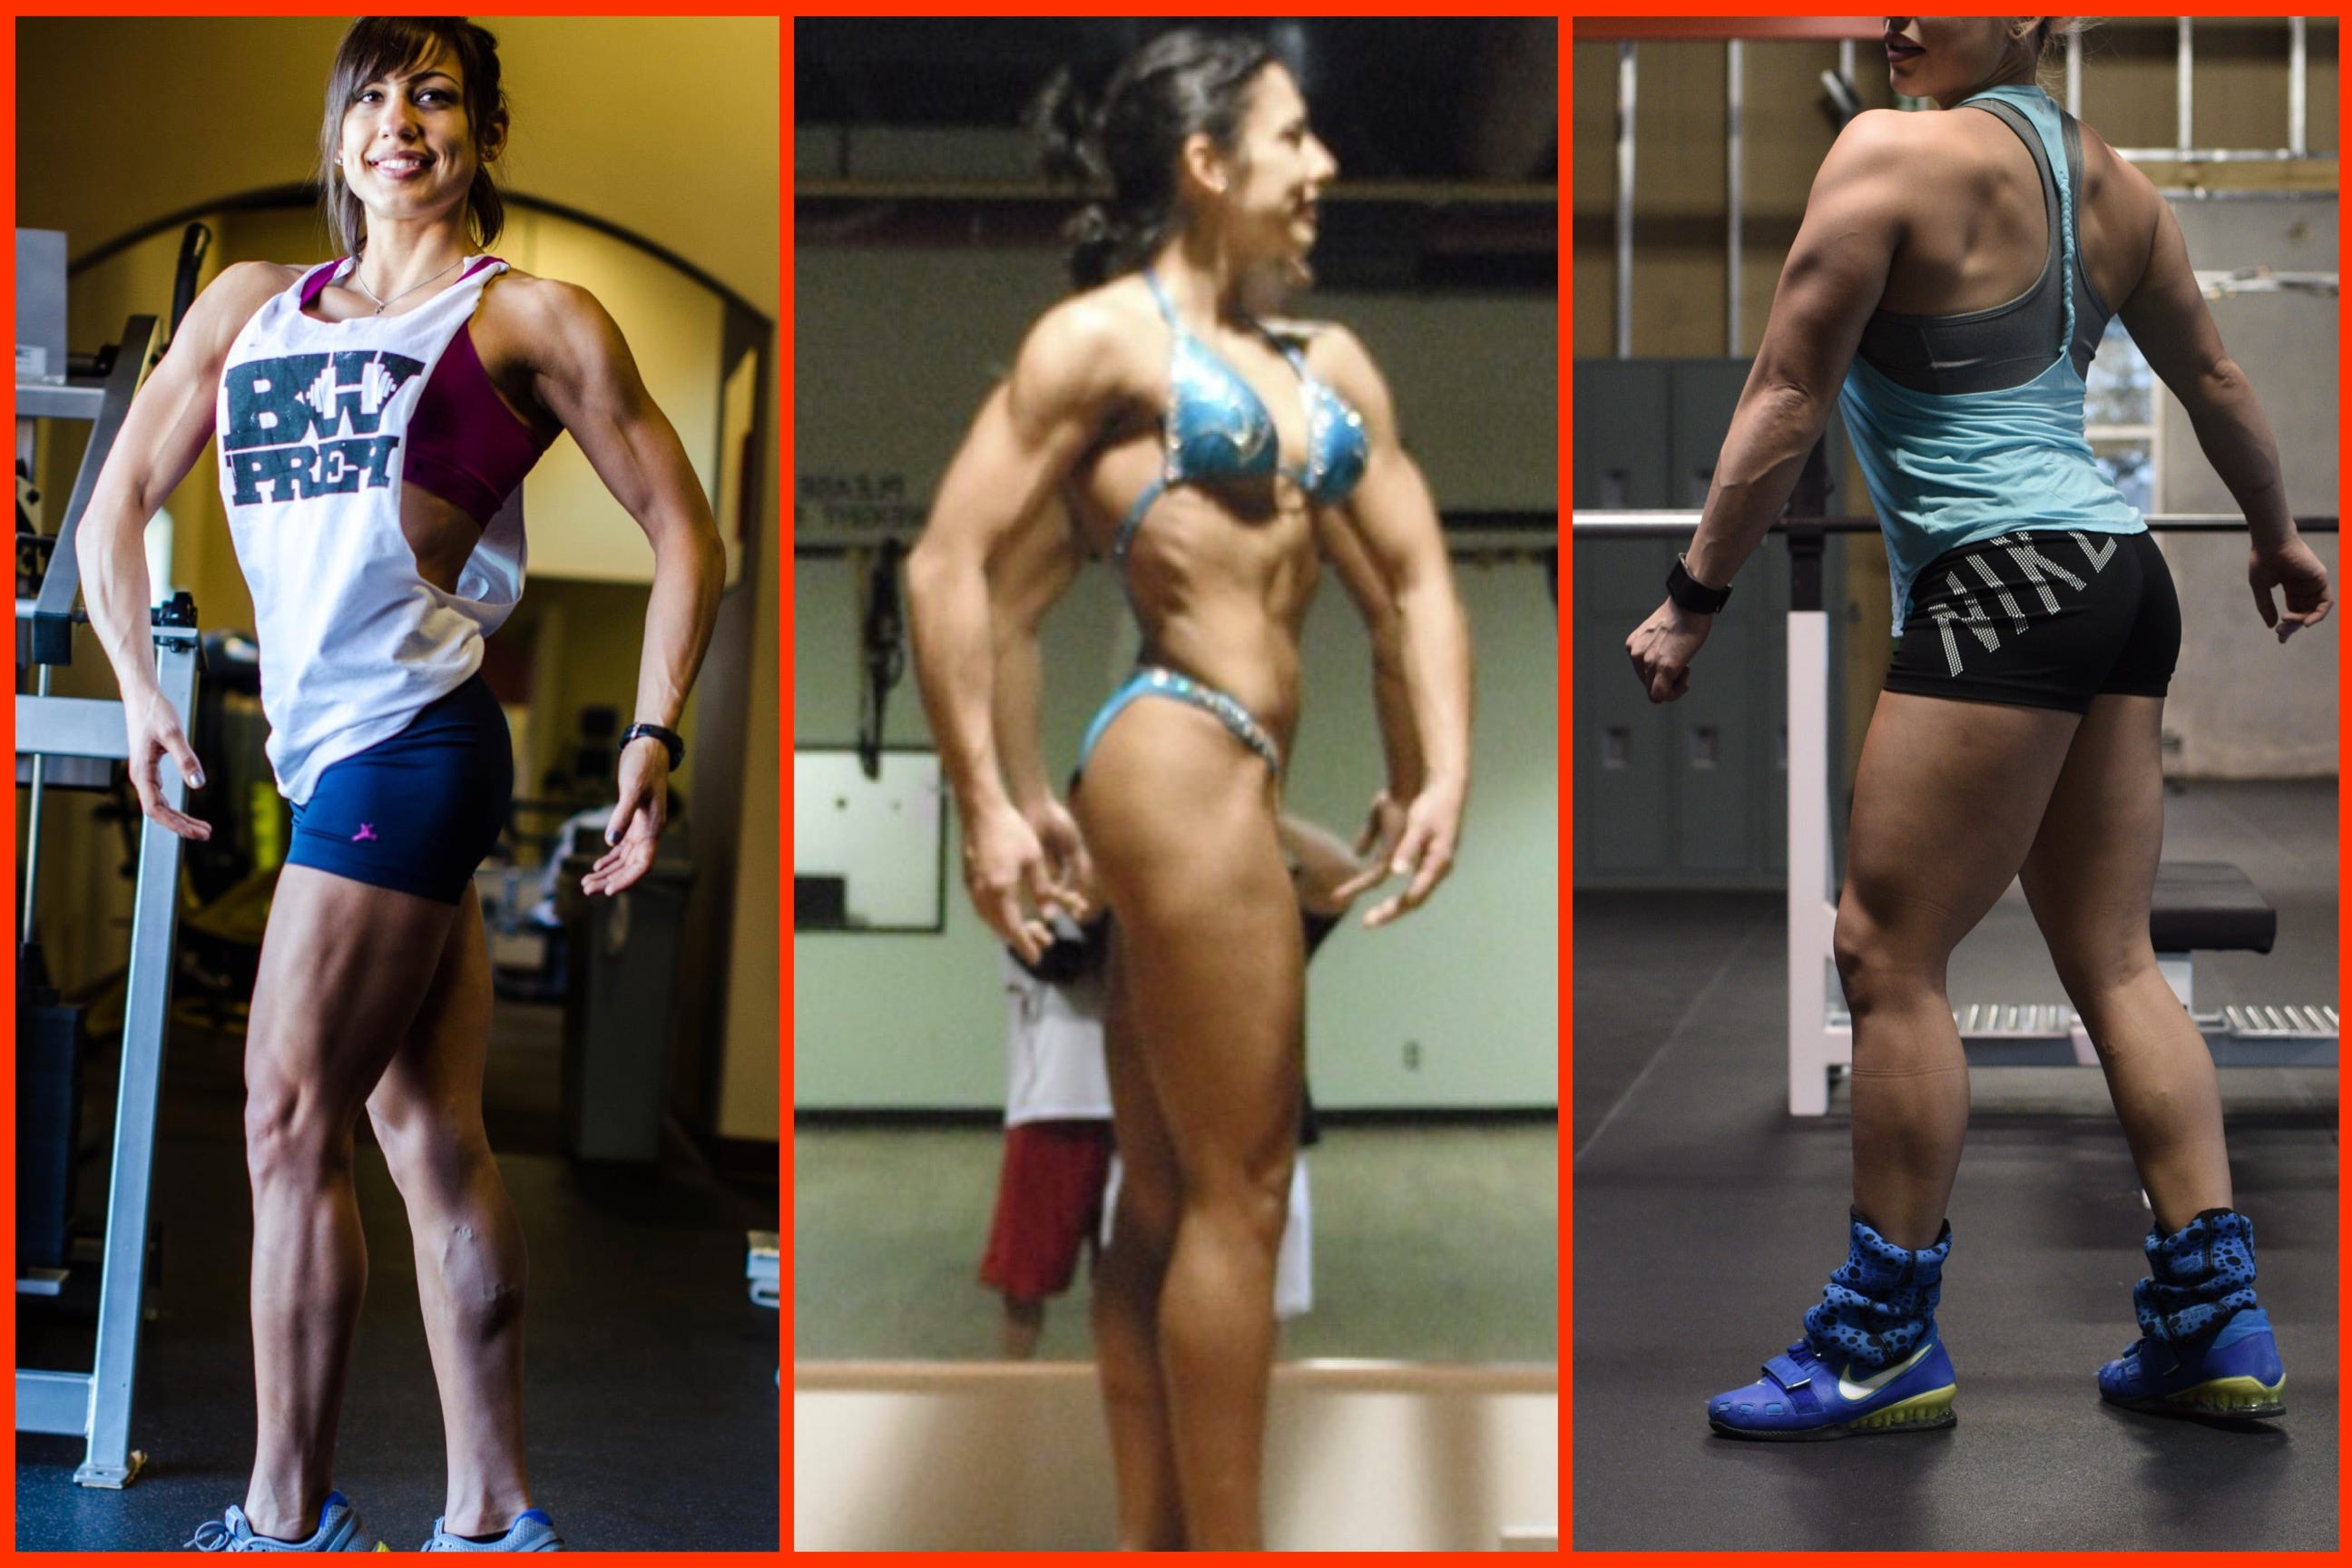 3 photos of andrea valdez's physique while lifting weights for muscular size and strength